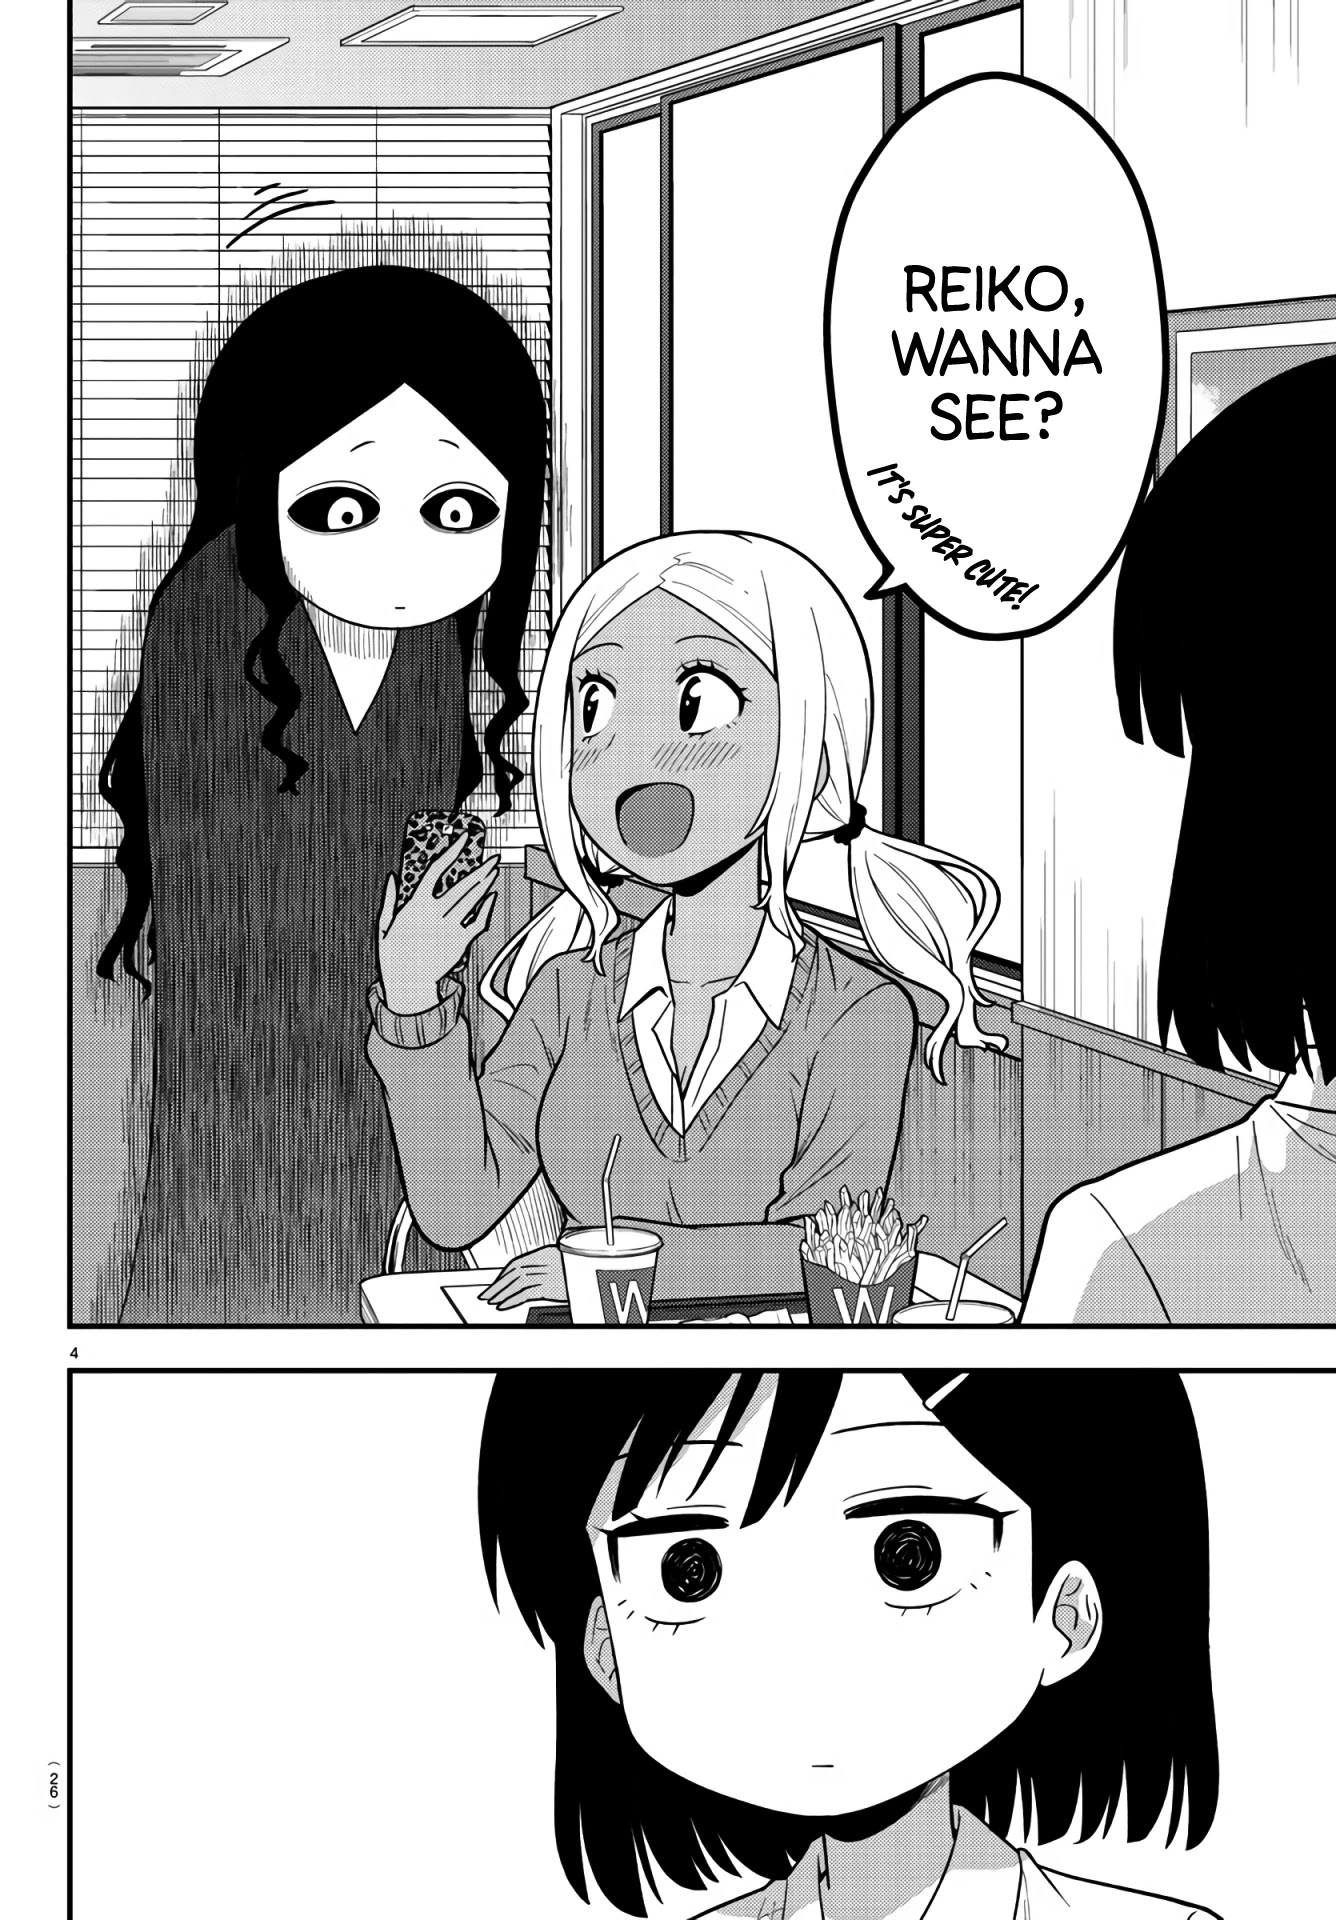 There's A Ghost Behind That Gyaru - chapter 1 - #5